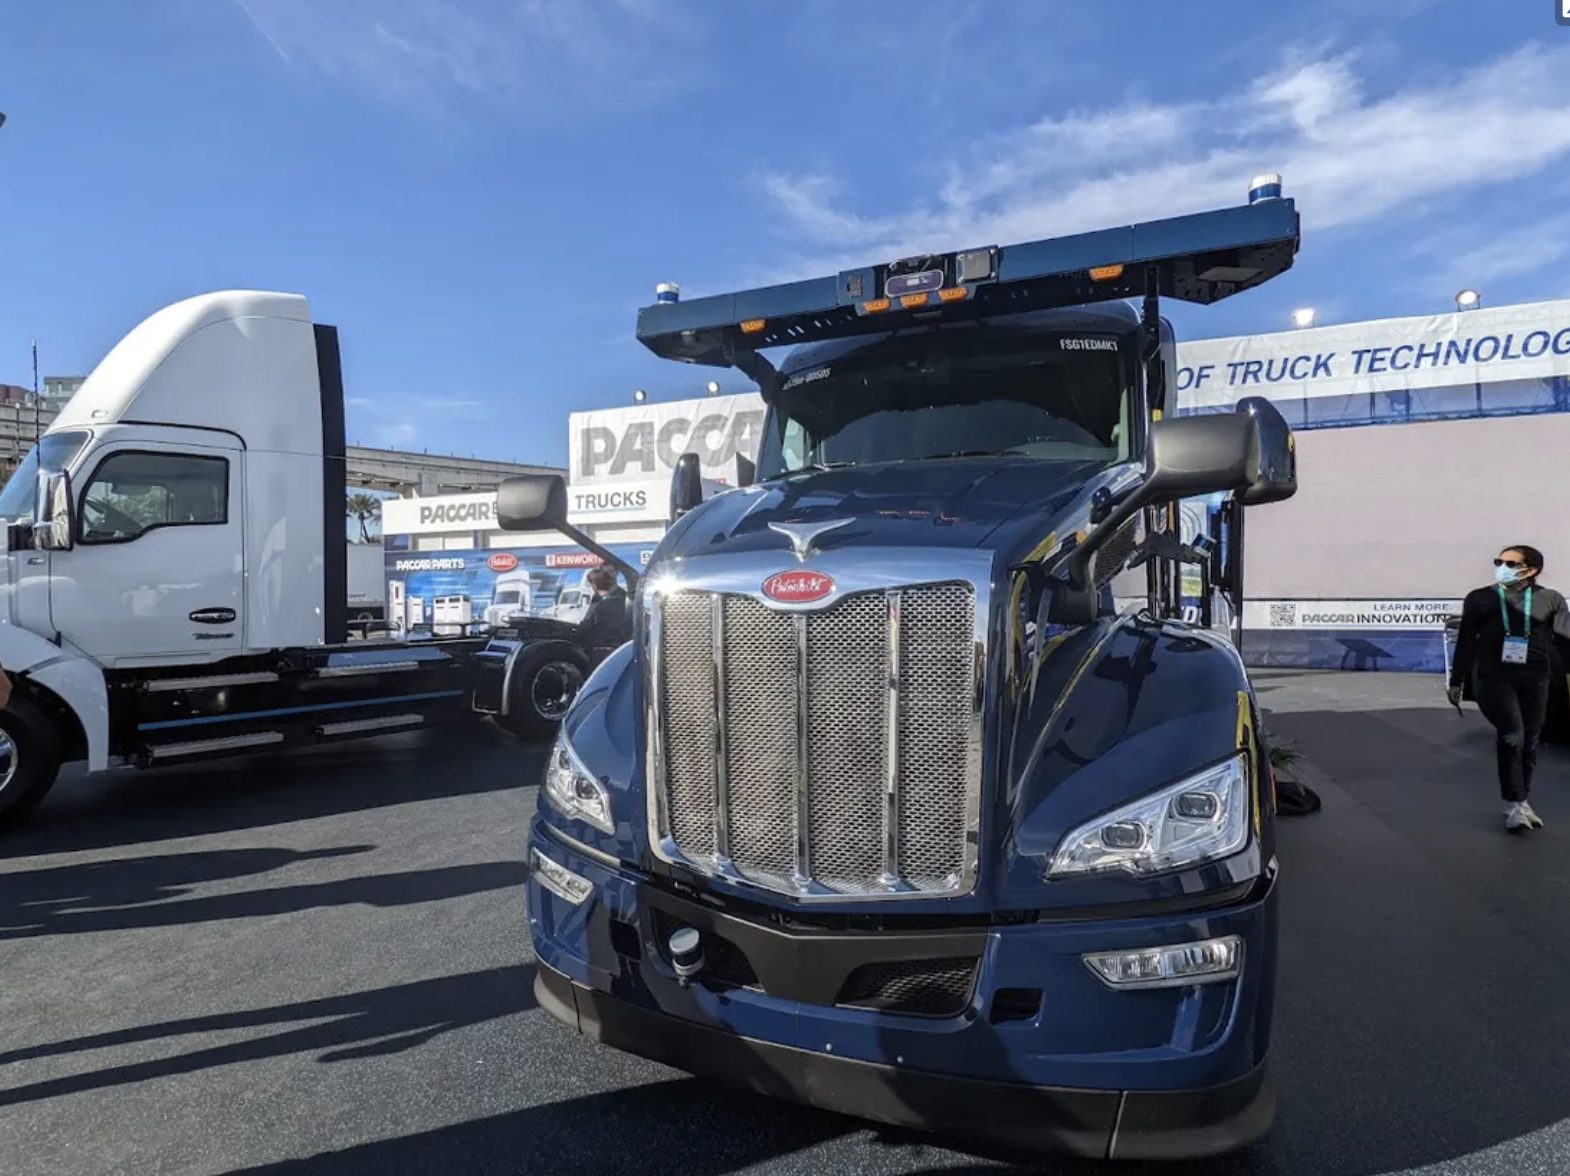 PACCAR at CES